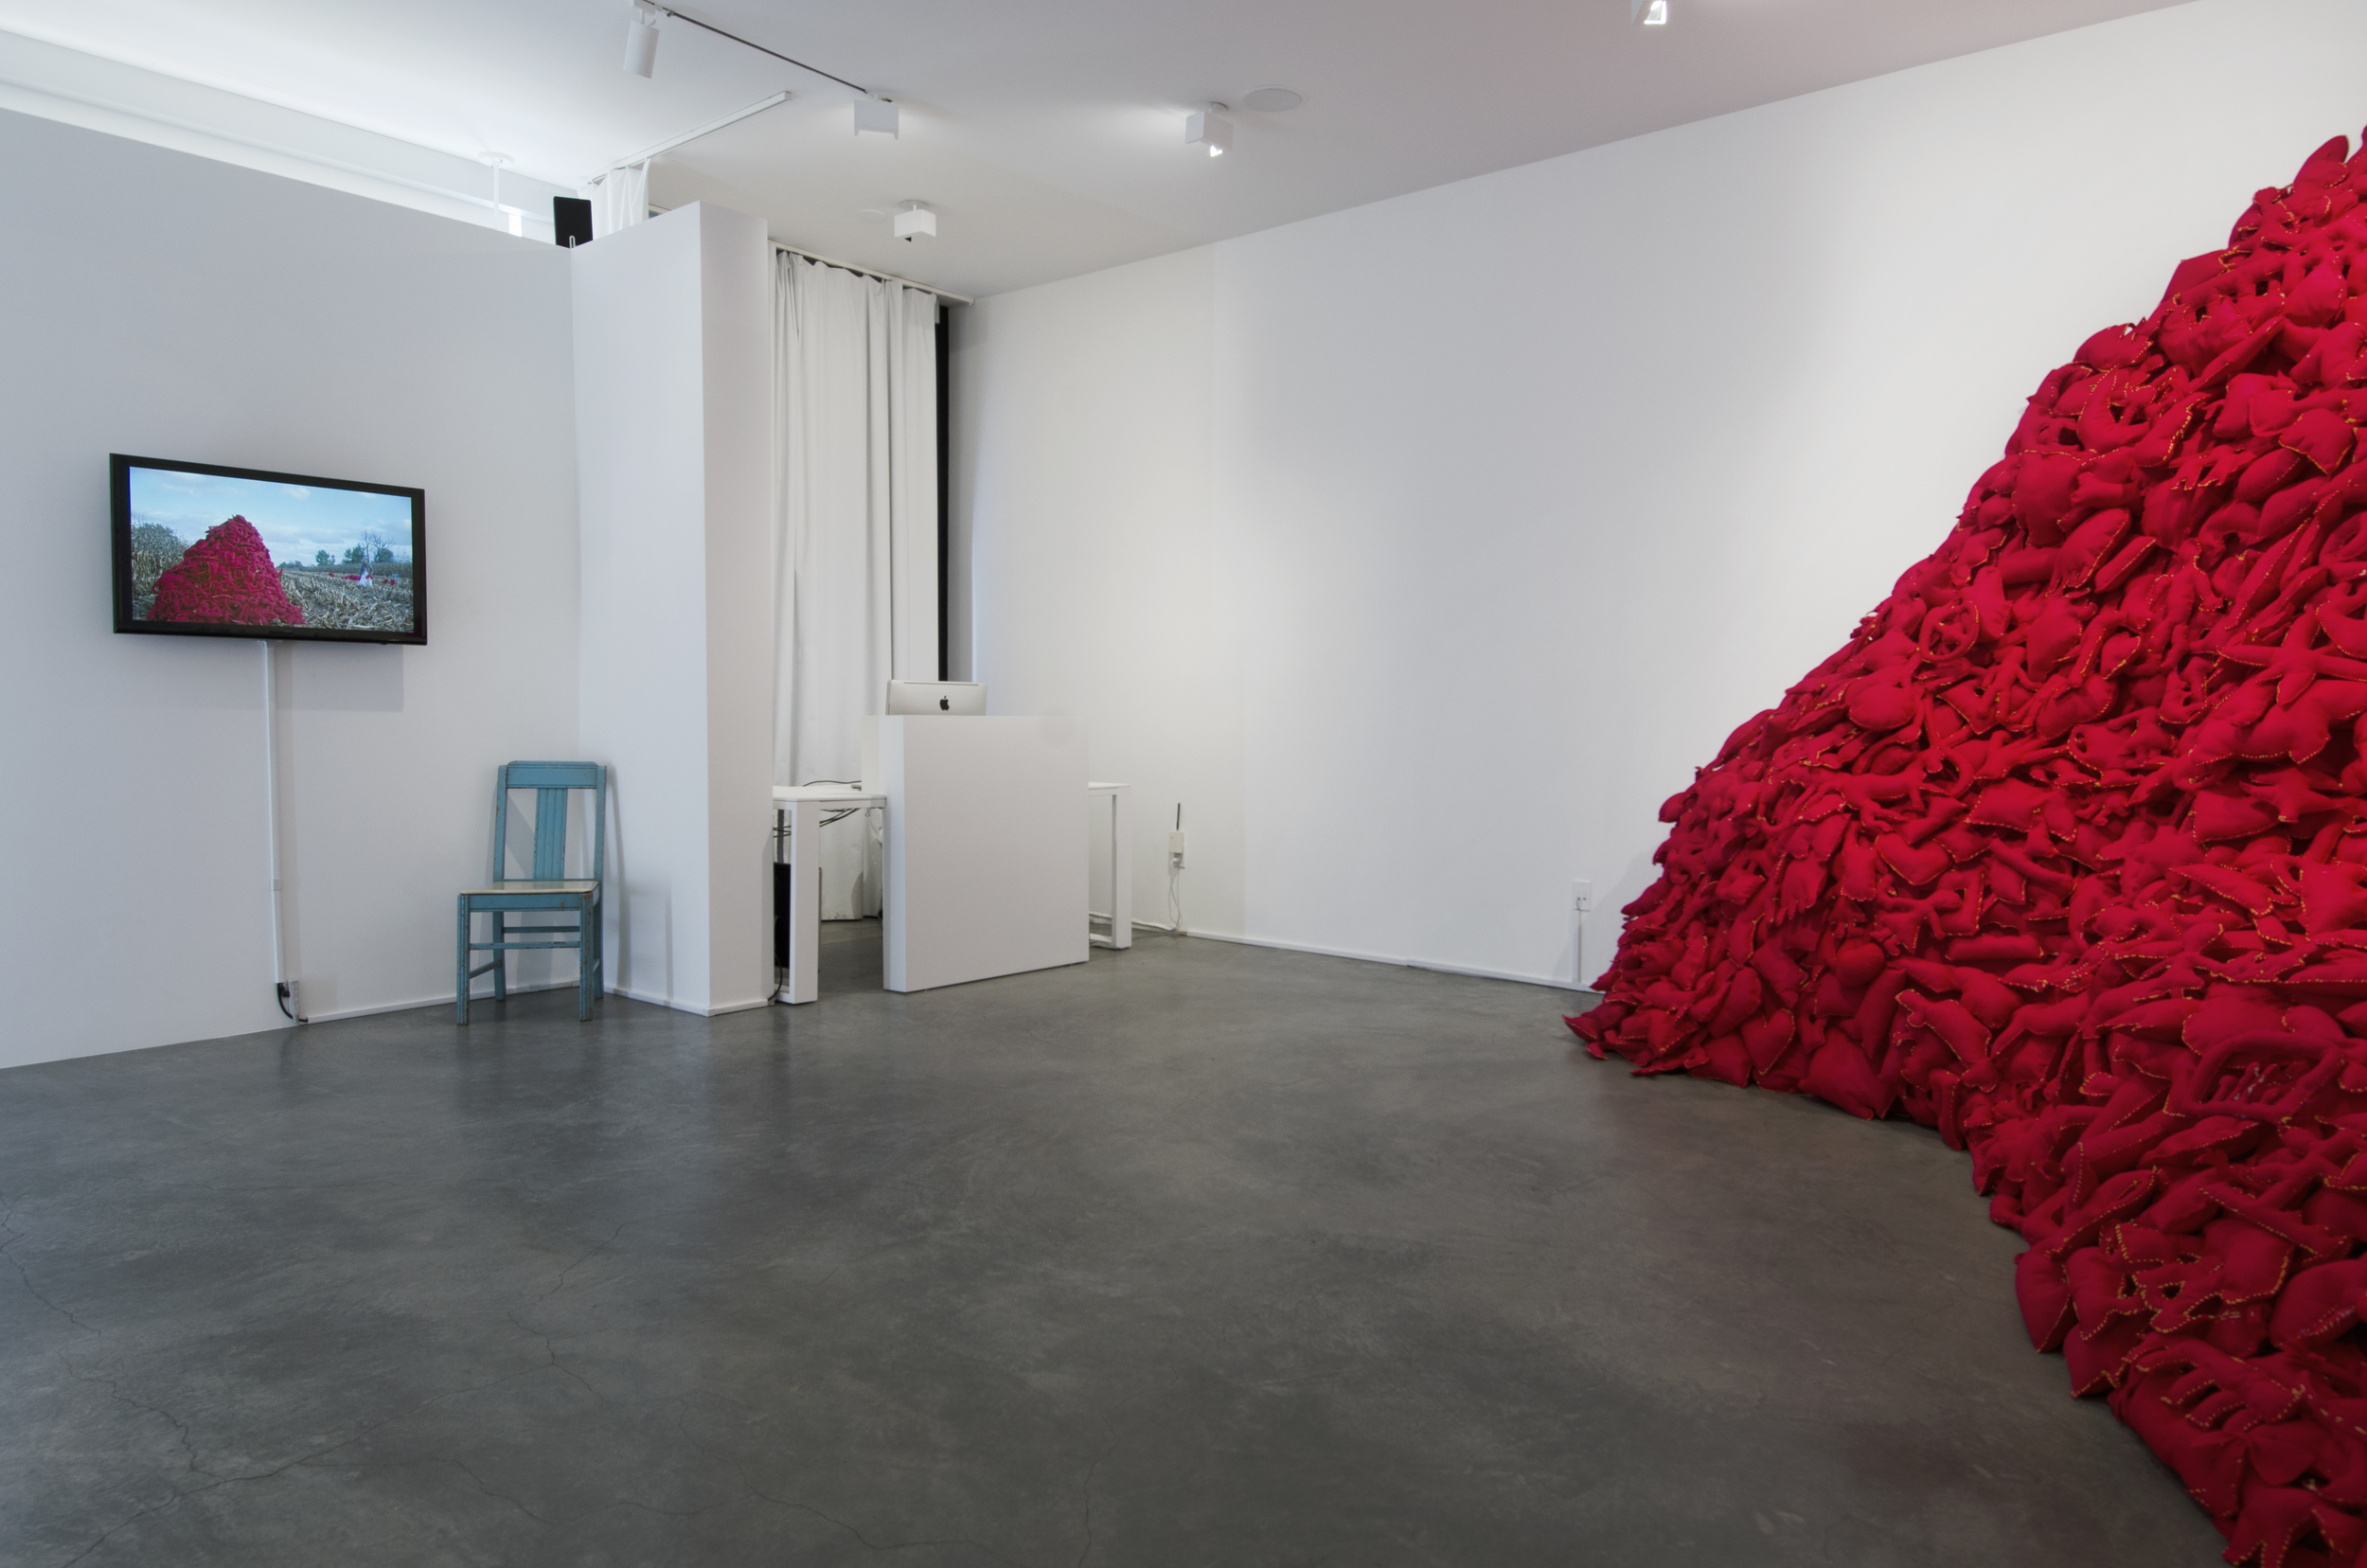  Installation View&nbsp; (Shulamit Gallery, 2014)   The Pile,&nbsp; 2014 Single Channel HD Video Projection with Sound (16mm Film), TRT 12:00, Looping; Digital C-Prints; Hand-Stitched Red Felt Objects Installation Dimensions Variable 